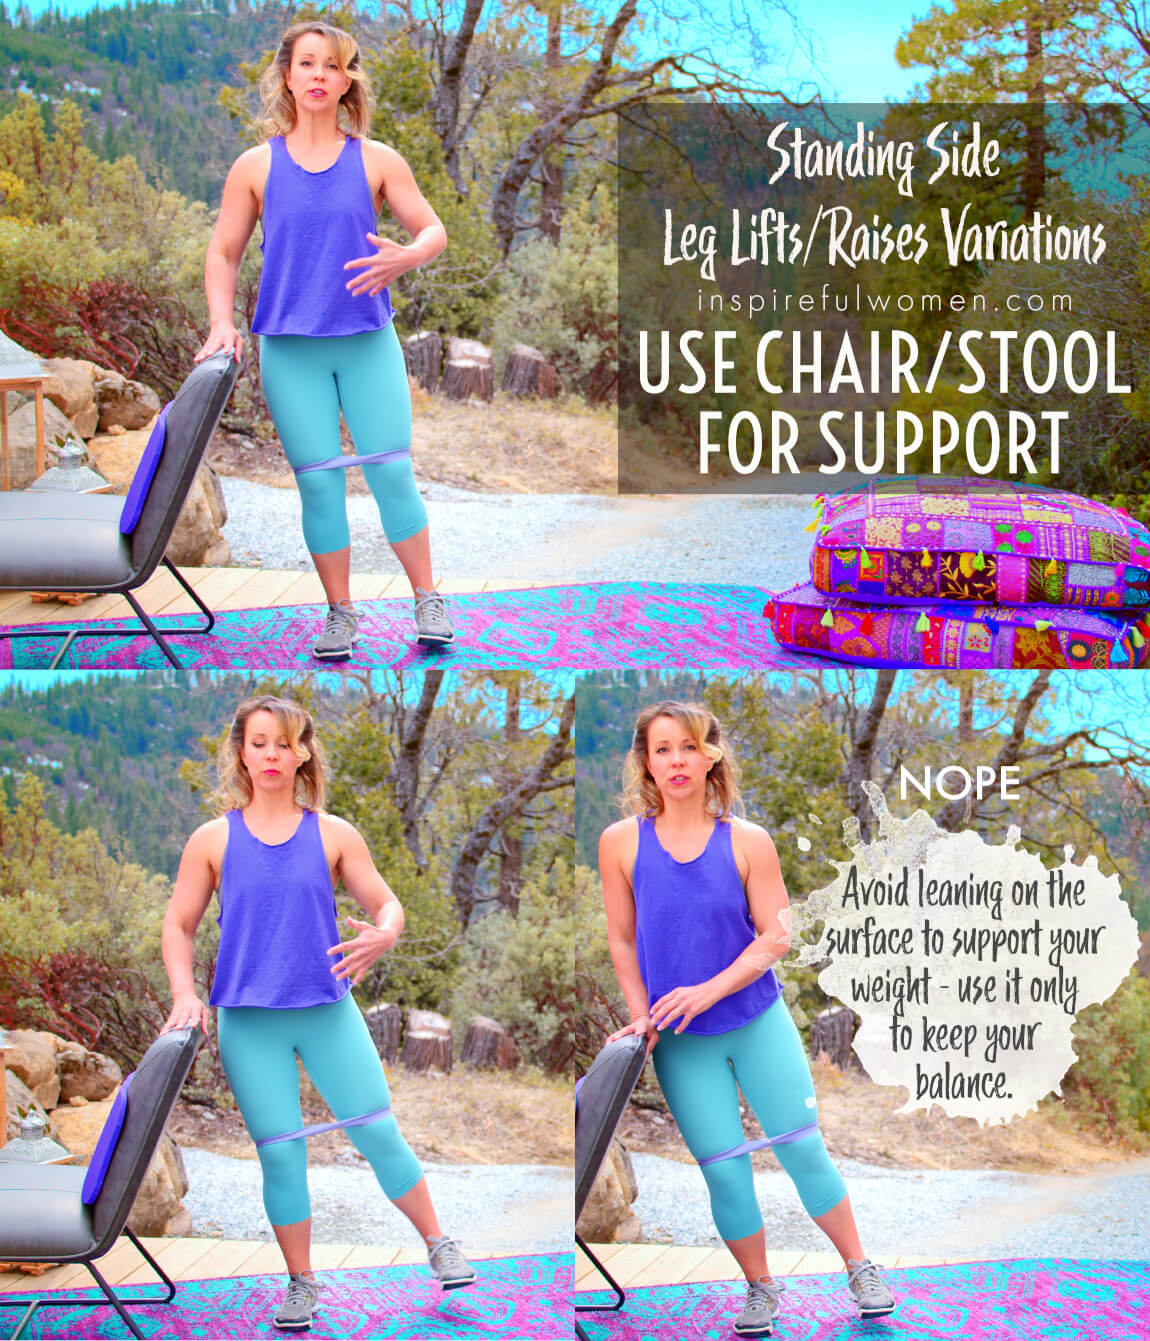 use-chair-stool-for-support-standing-side-leg-raises-resistance-band-exercise-variations